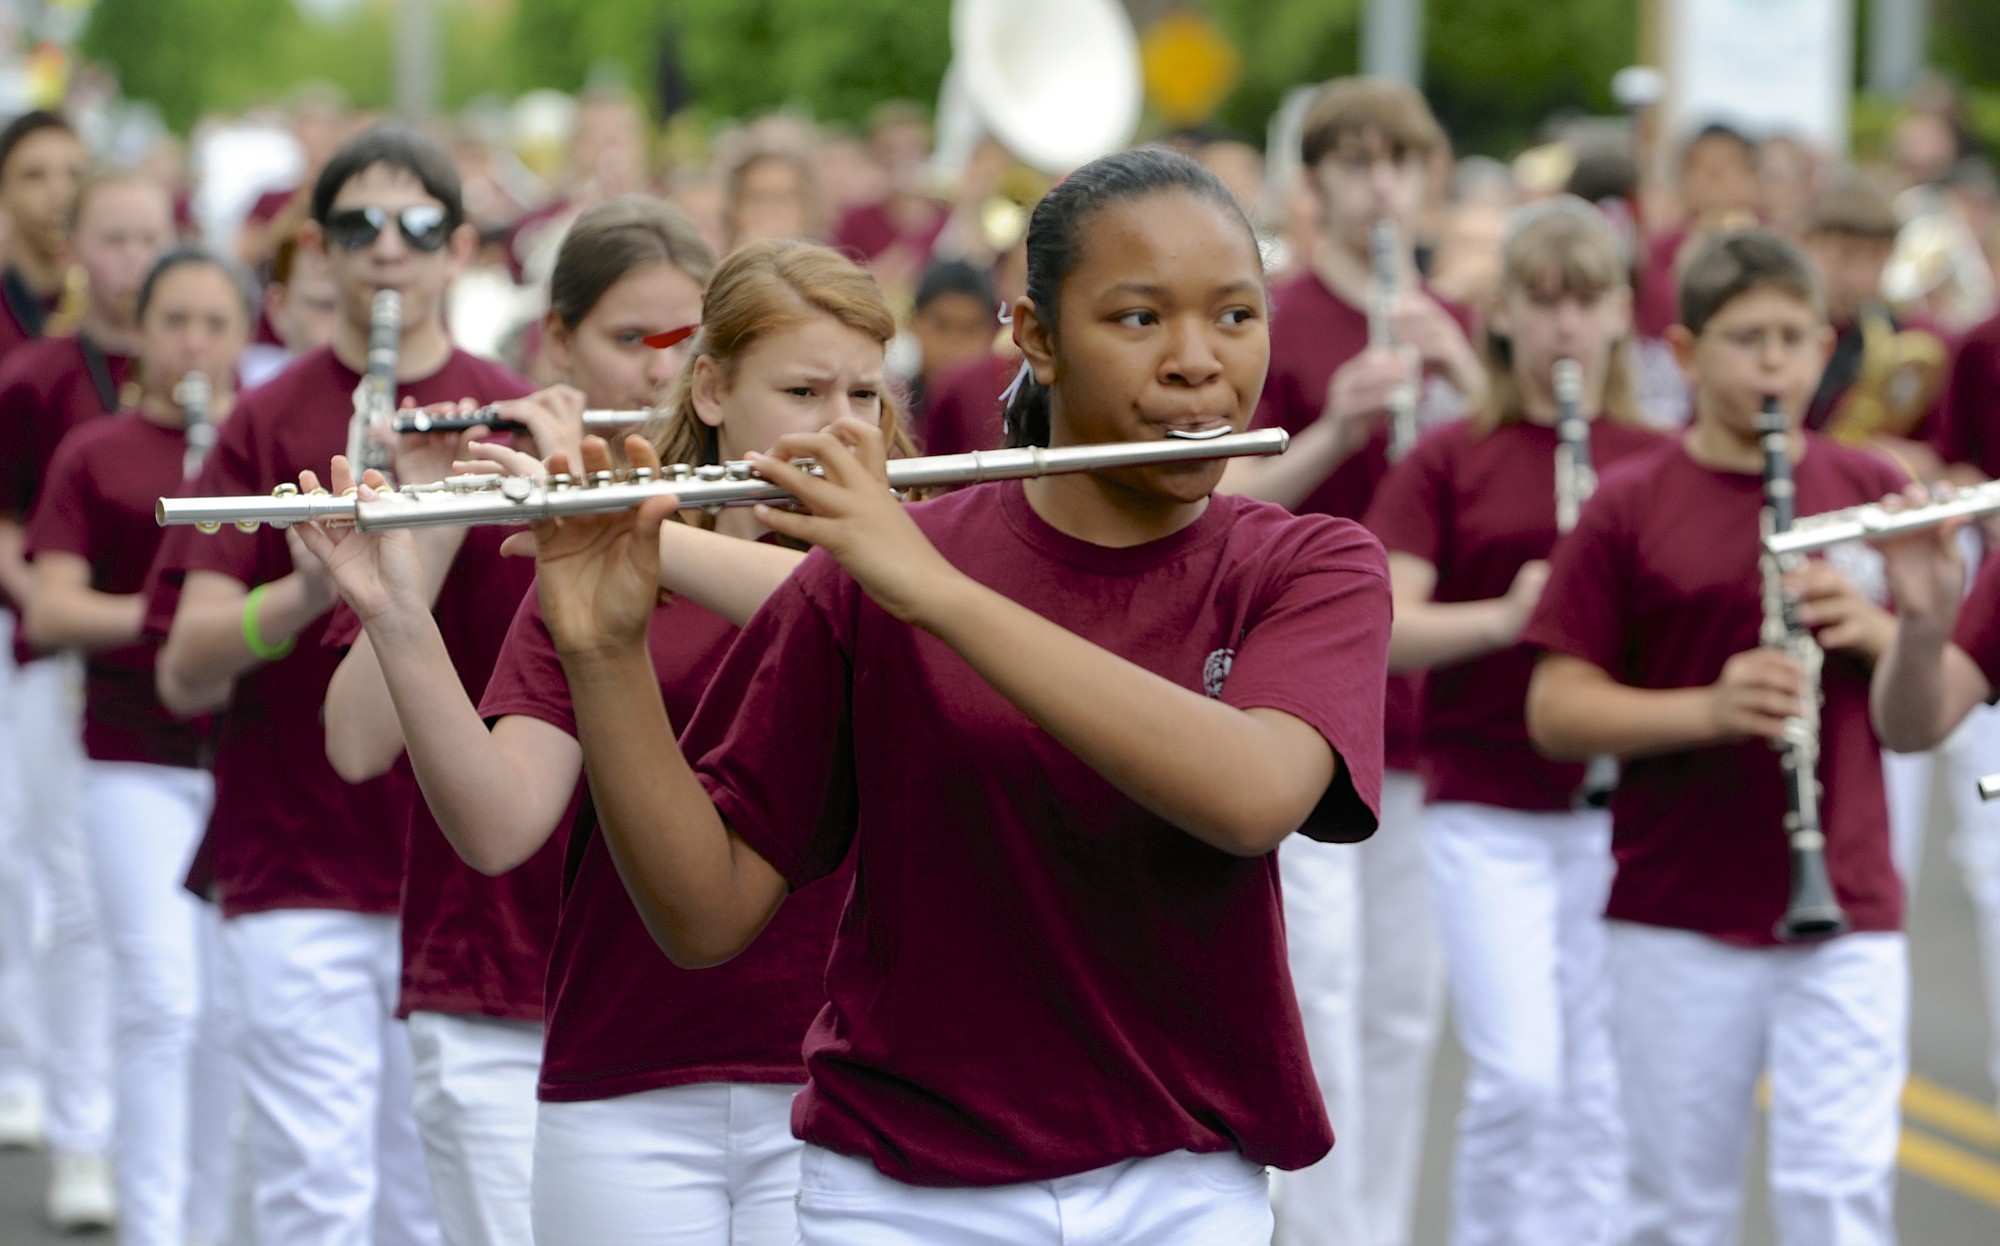 The Laurin Middle School band from Battle Ground marches in the annual Hazel Dell Parade of Bands on Saturday.